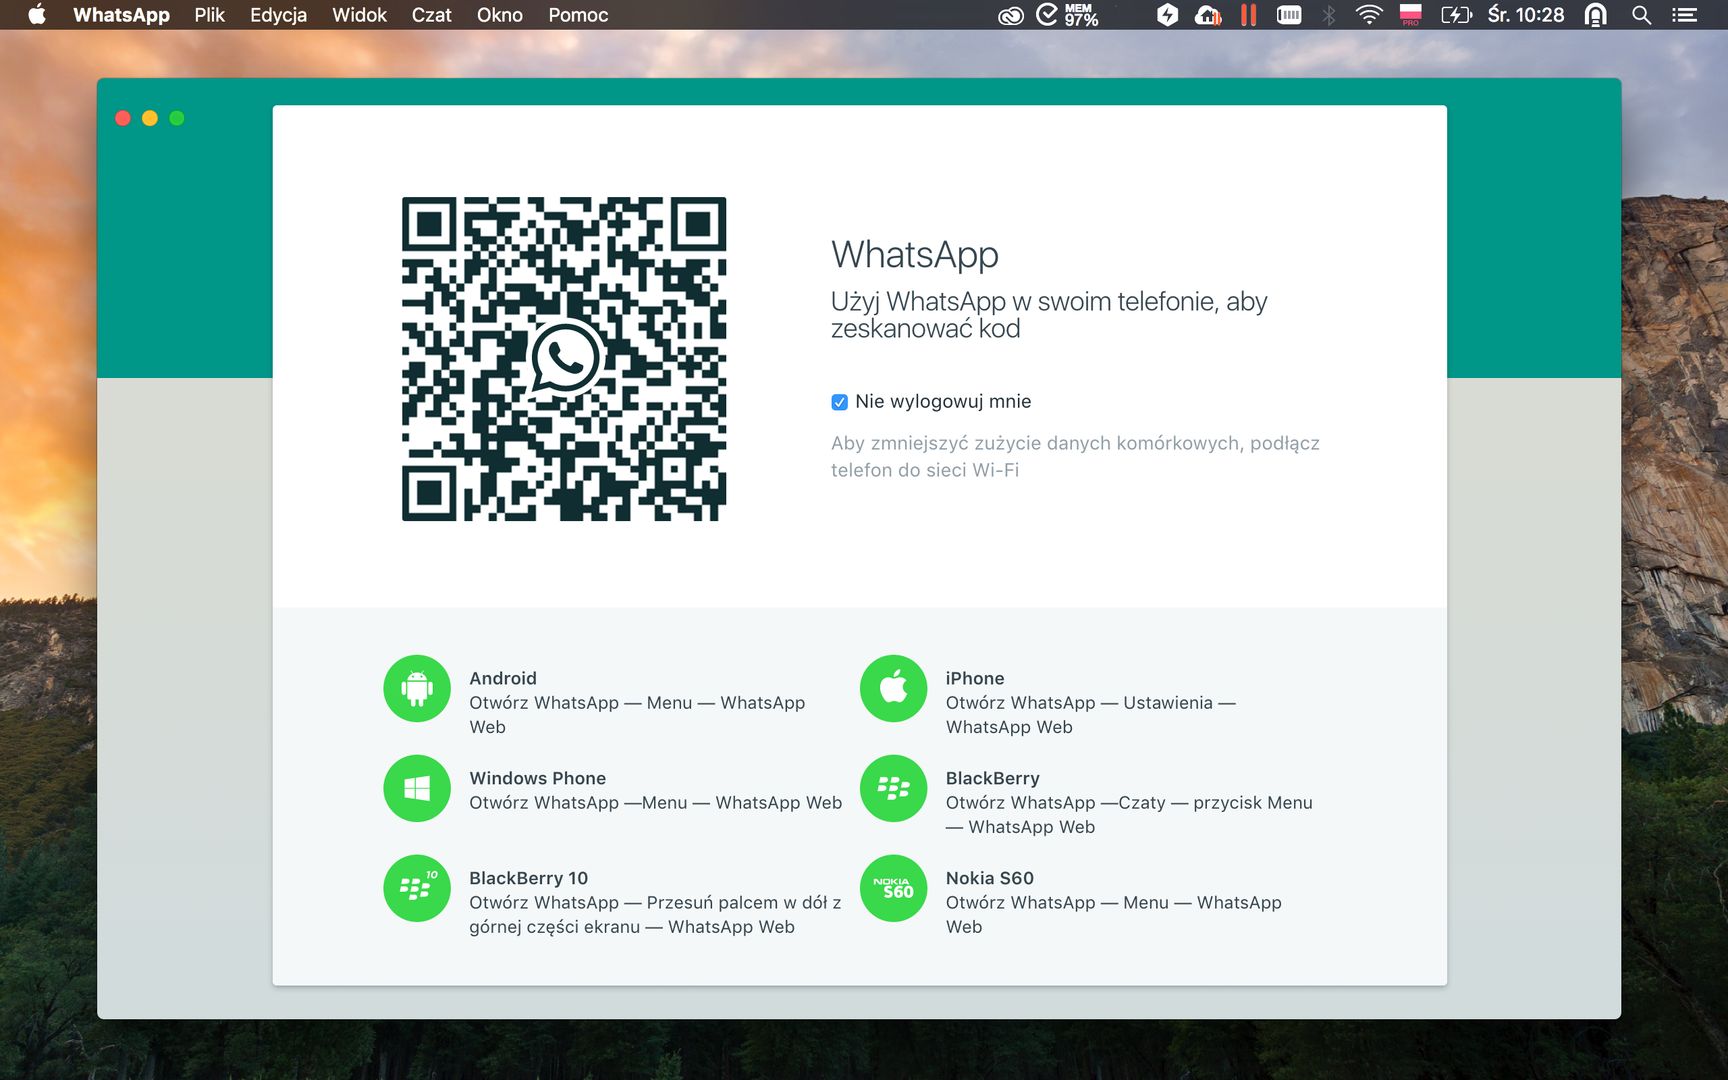 WhatsApp (2.2336.7.0) instal the new version for mac